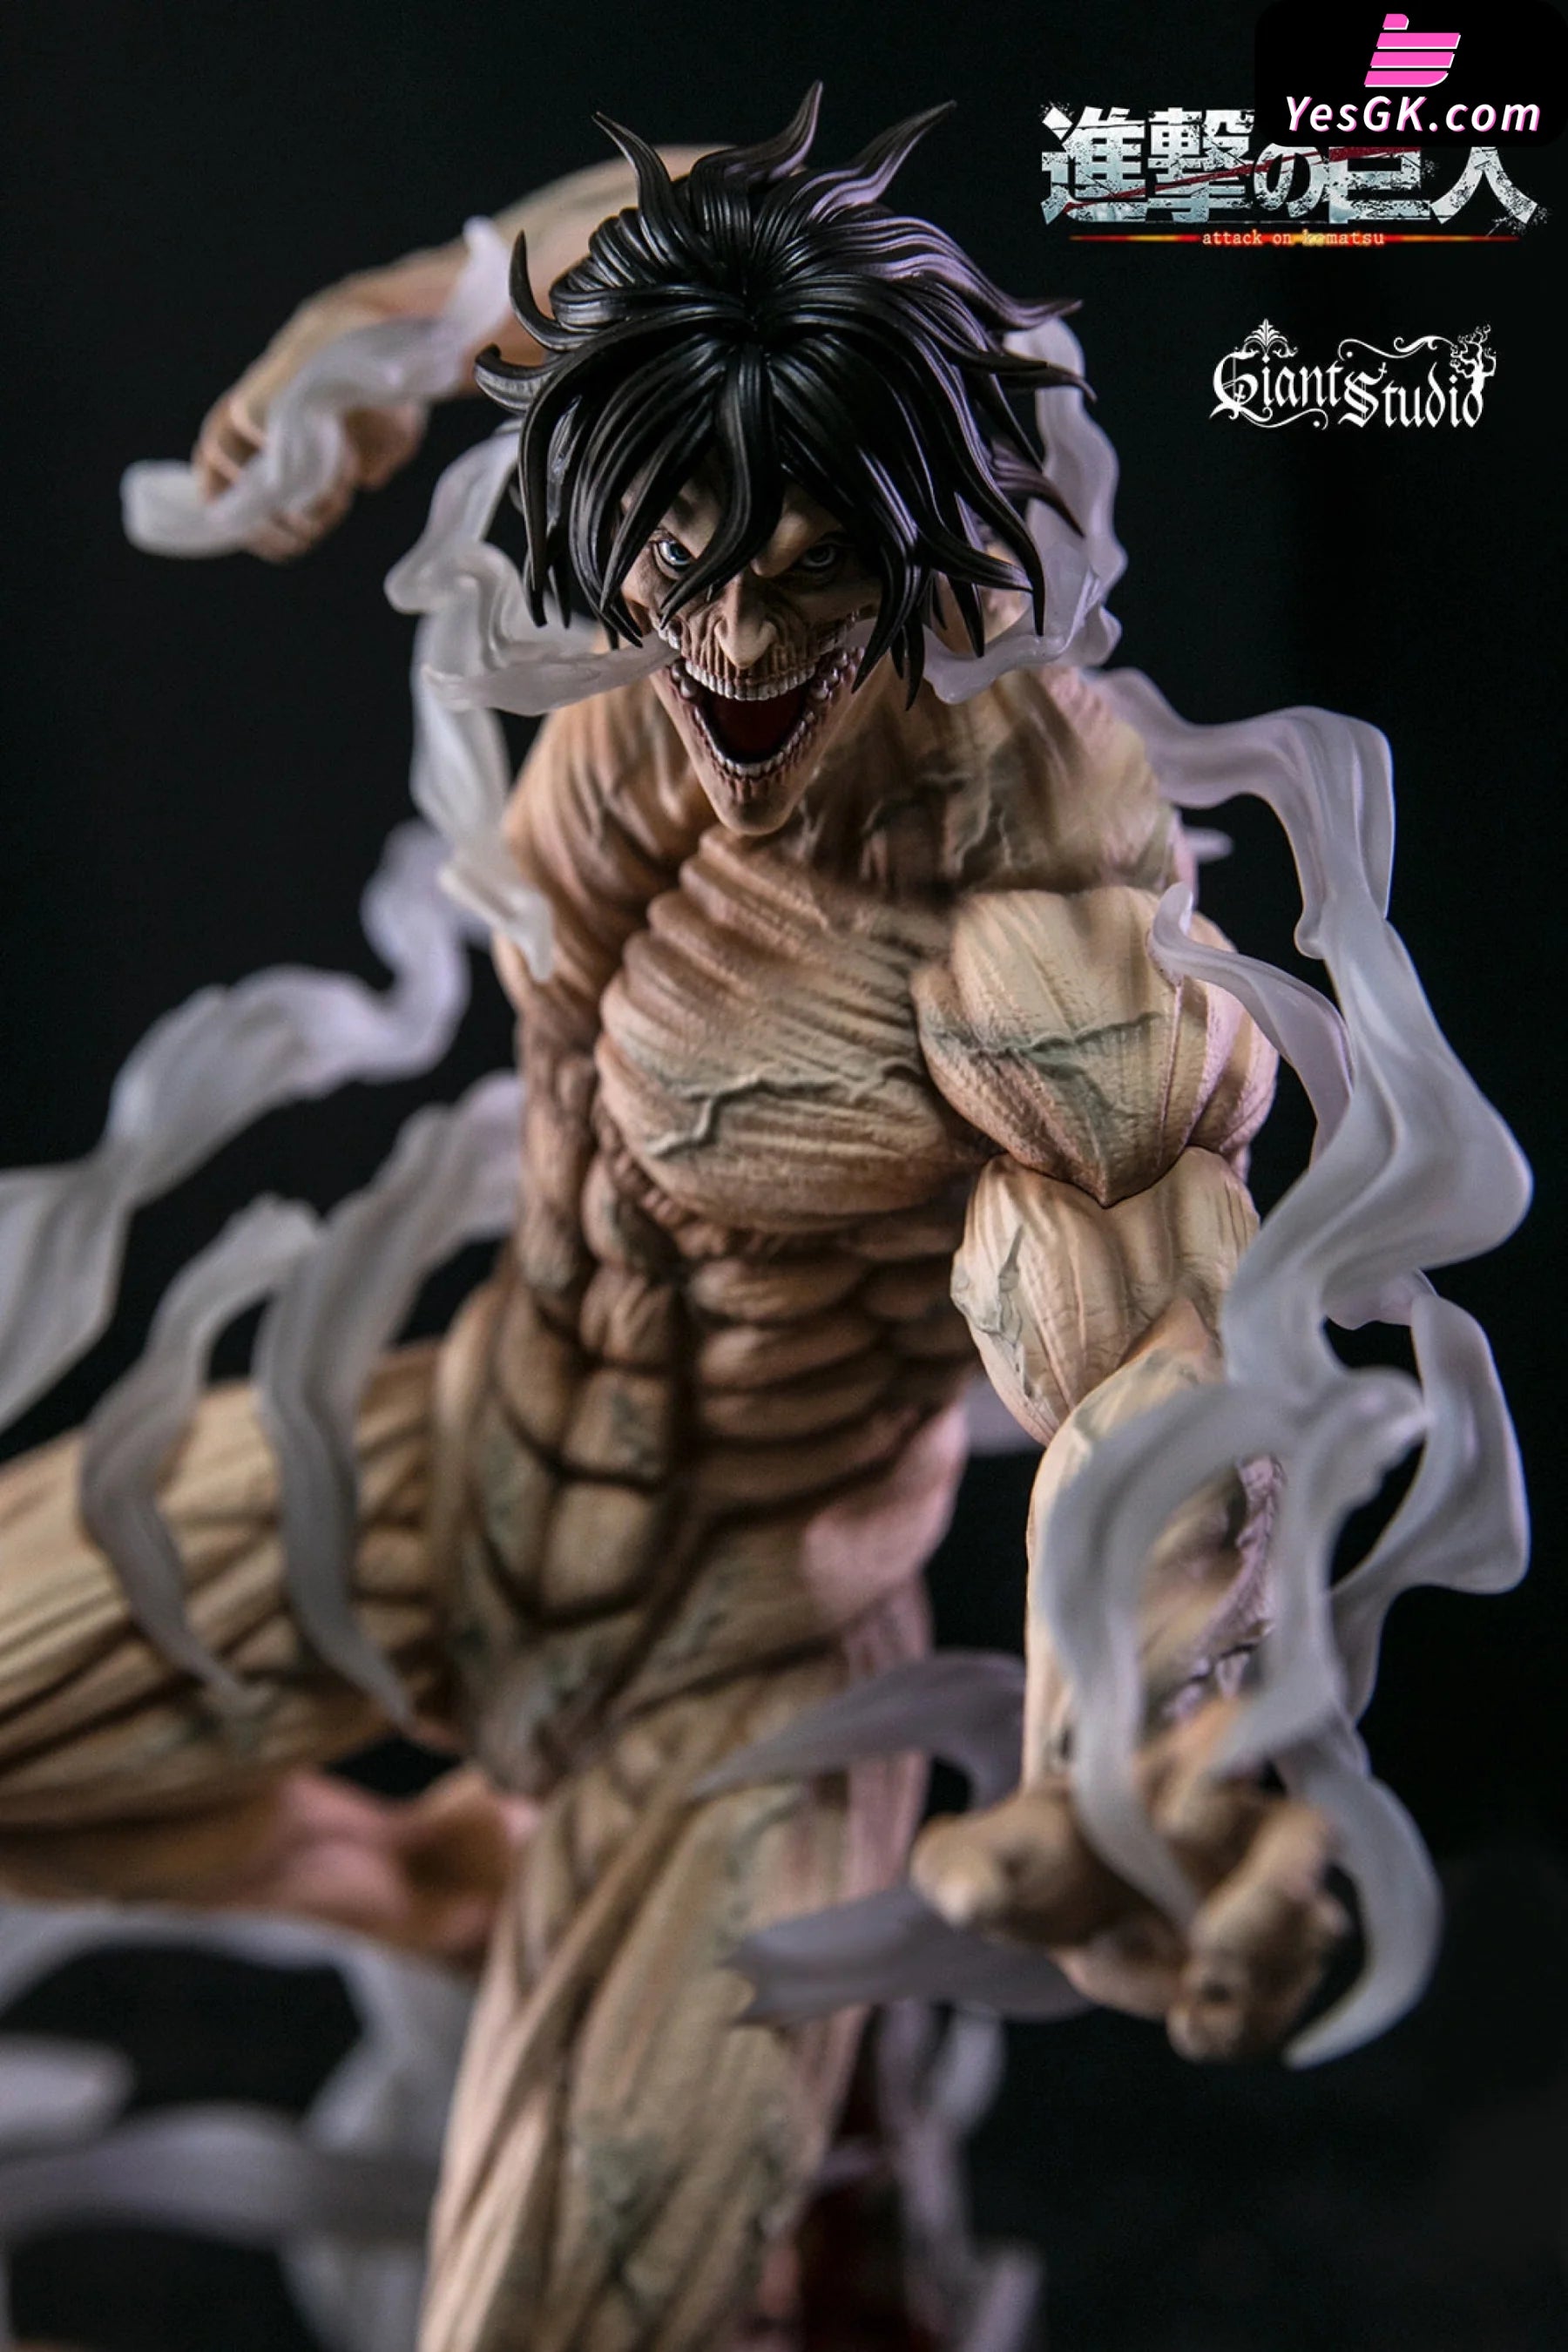 Attack On Titan The Eren Resin Statue - Giant Studio [Pre-Order Closed] Full Payment On